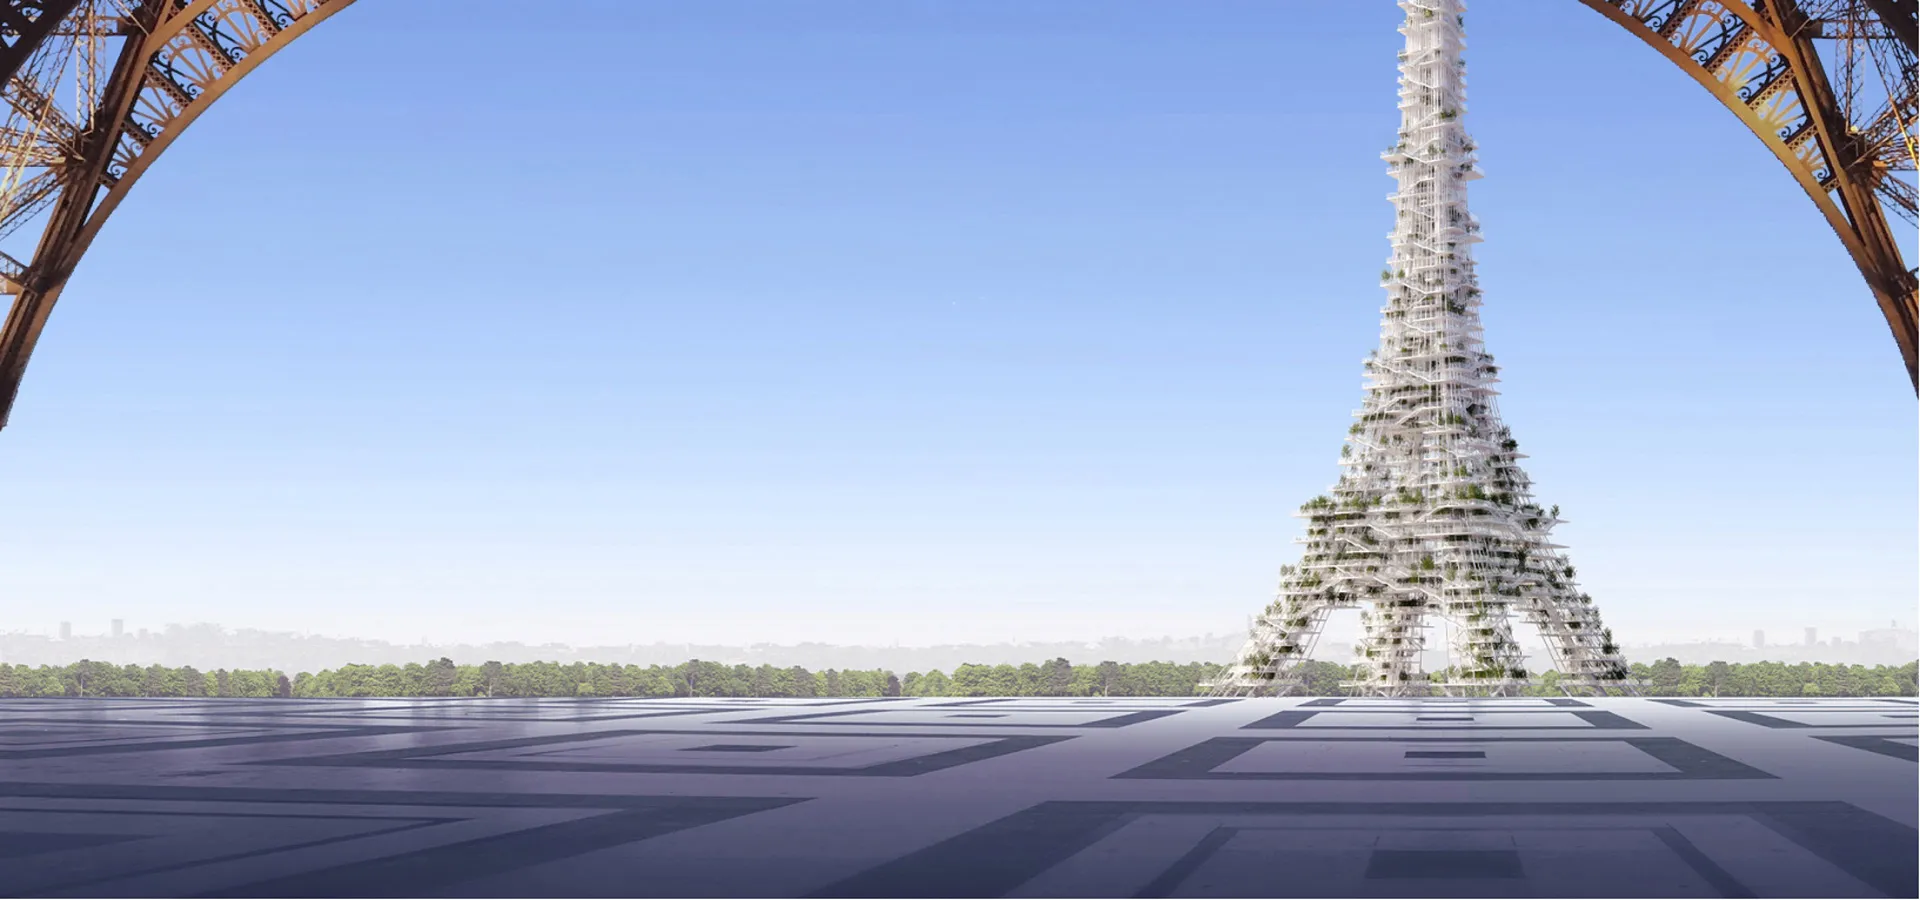 Building tomorrow > Infrastructure & Cities > Dassault Systèmes®